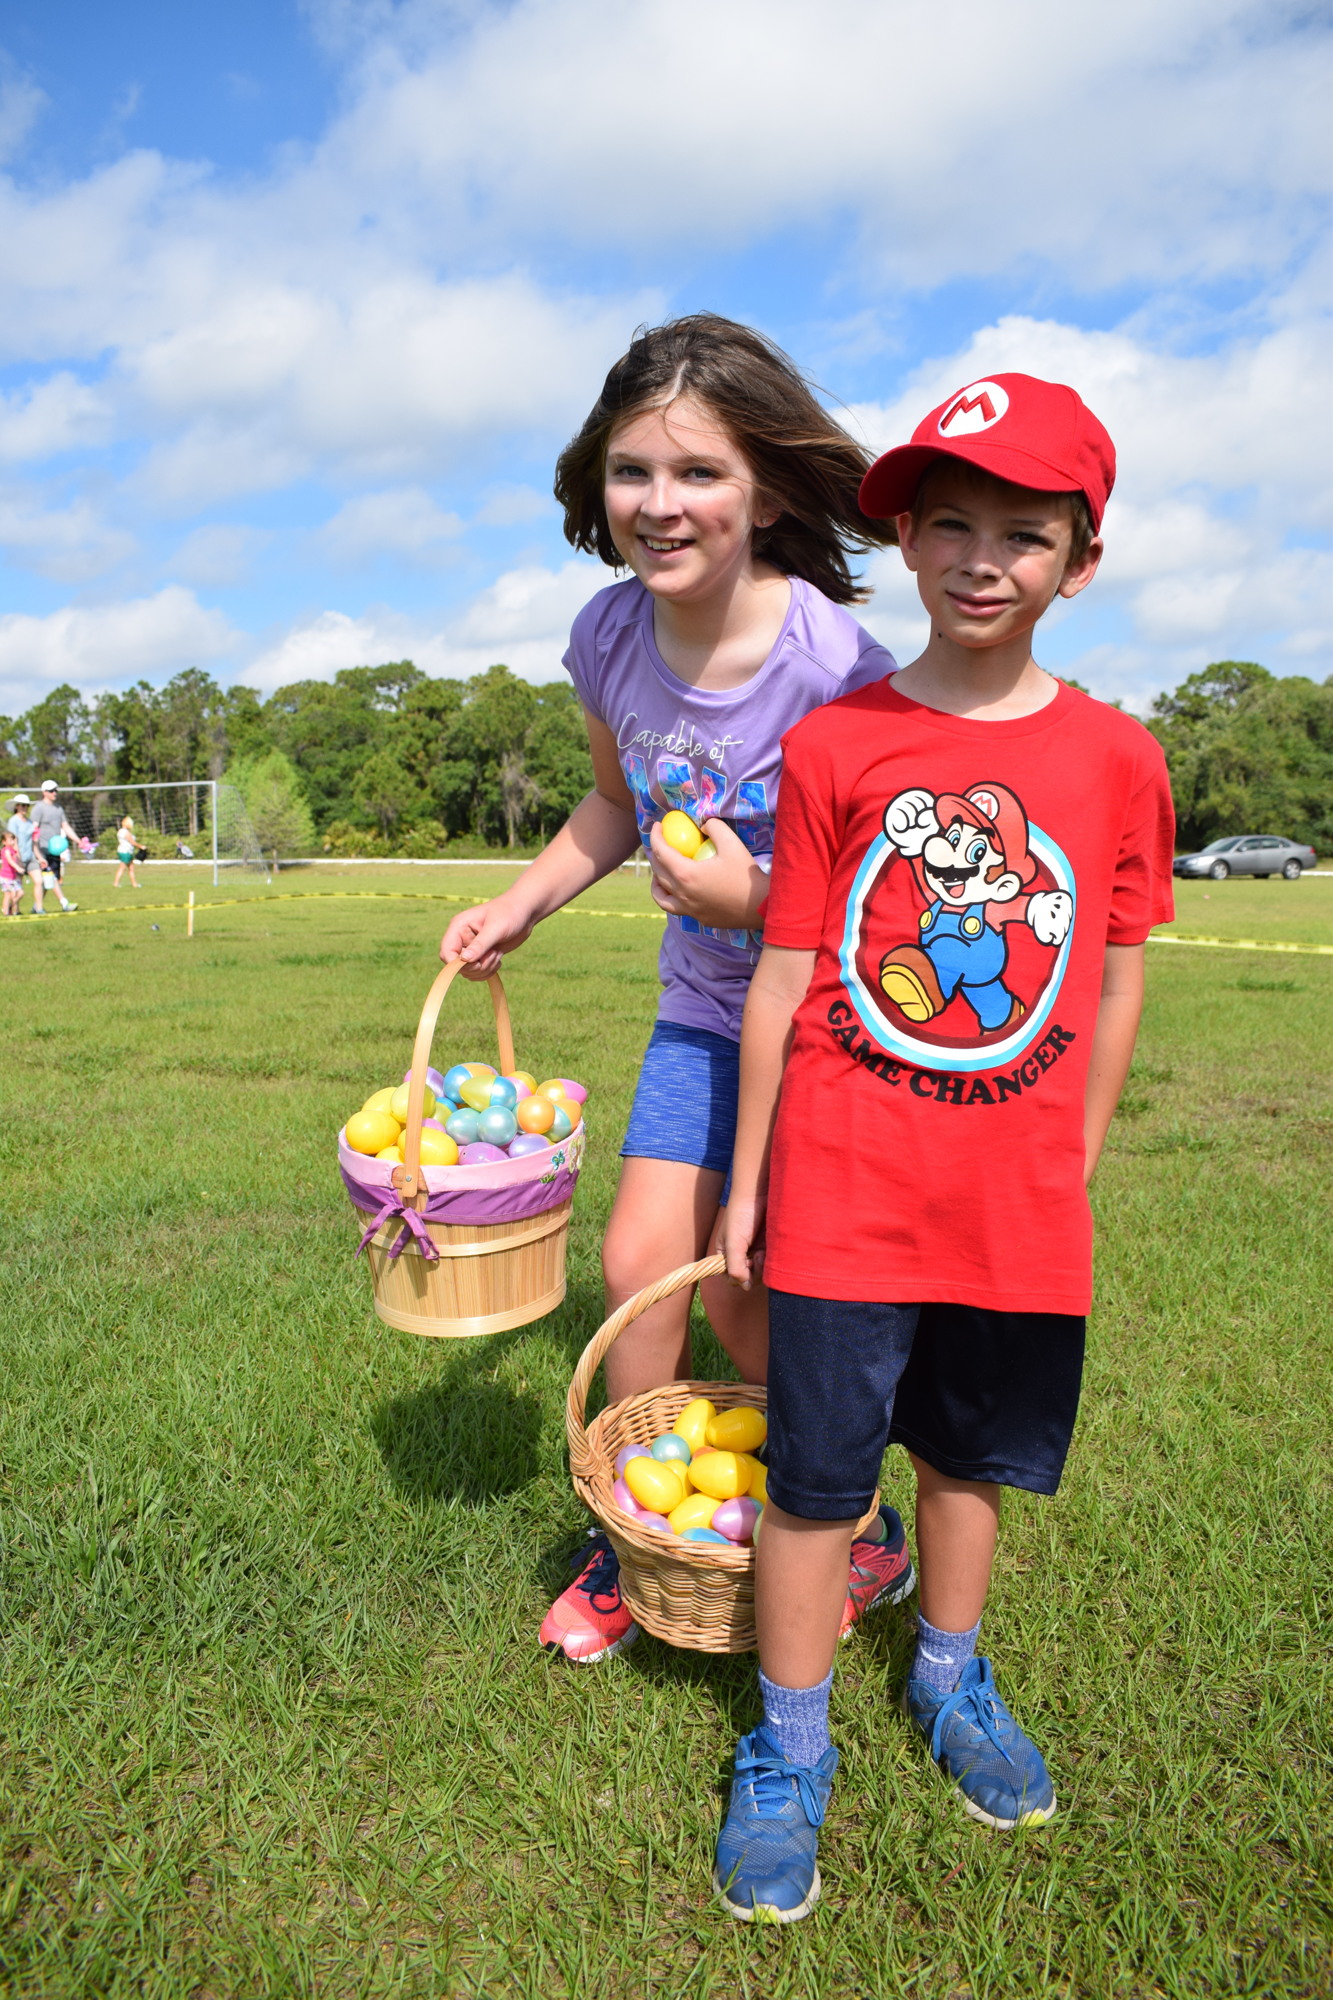 At the 2019 EGGstravaganza, Allison and Ryan Rothhaar gathered quite a haul. (File photo)